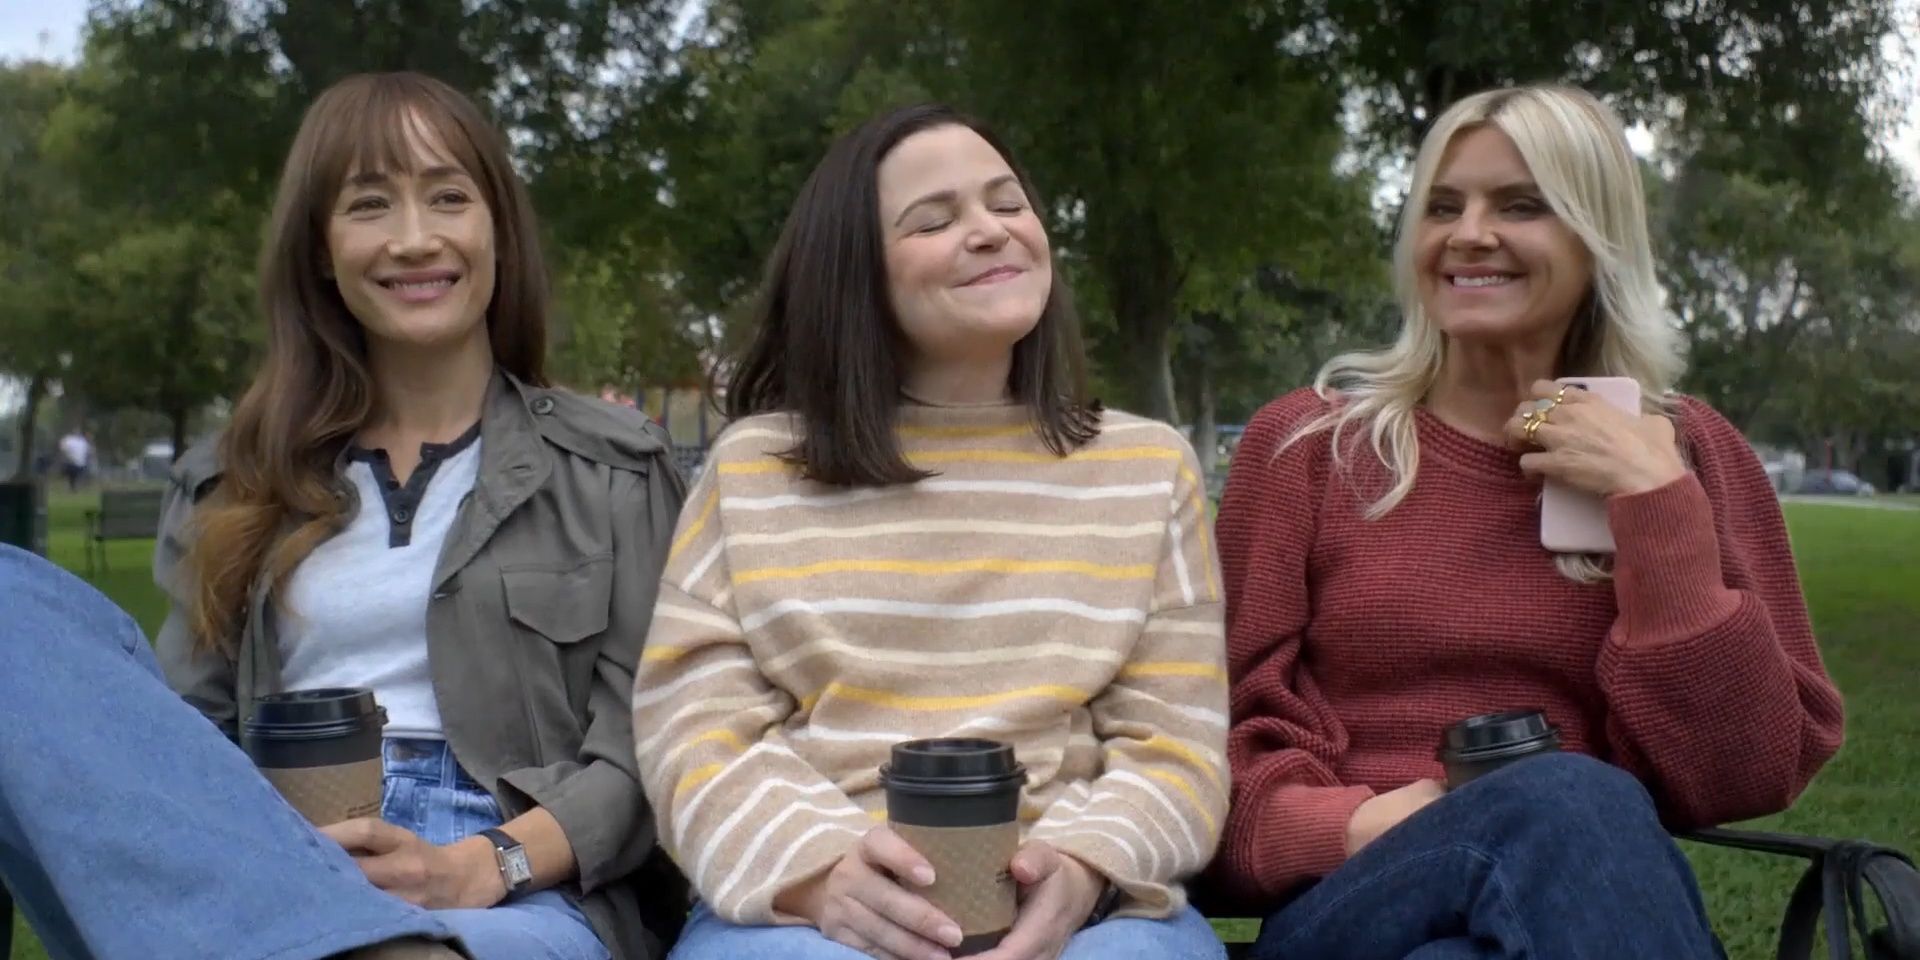 The cast of Pivoting sits on a park bench